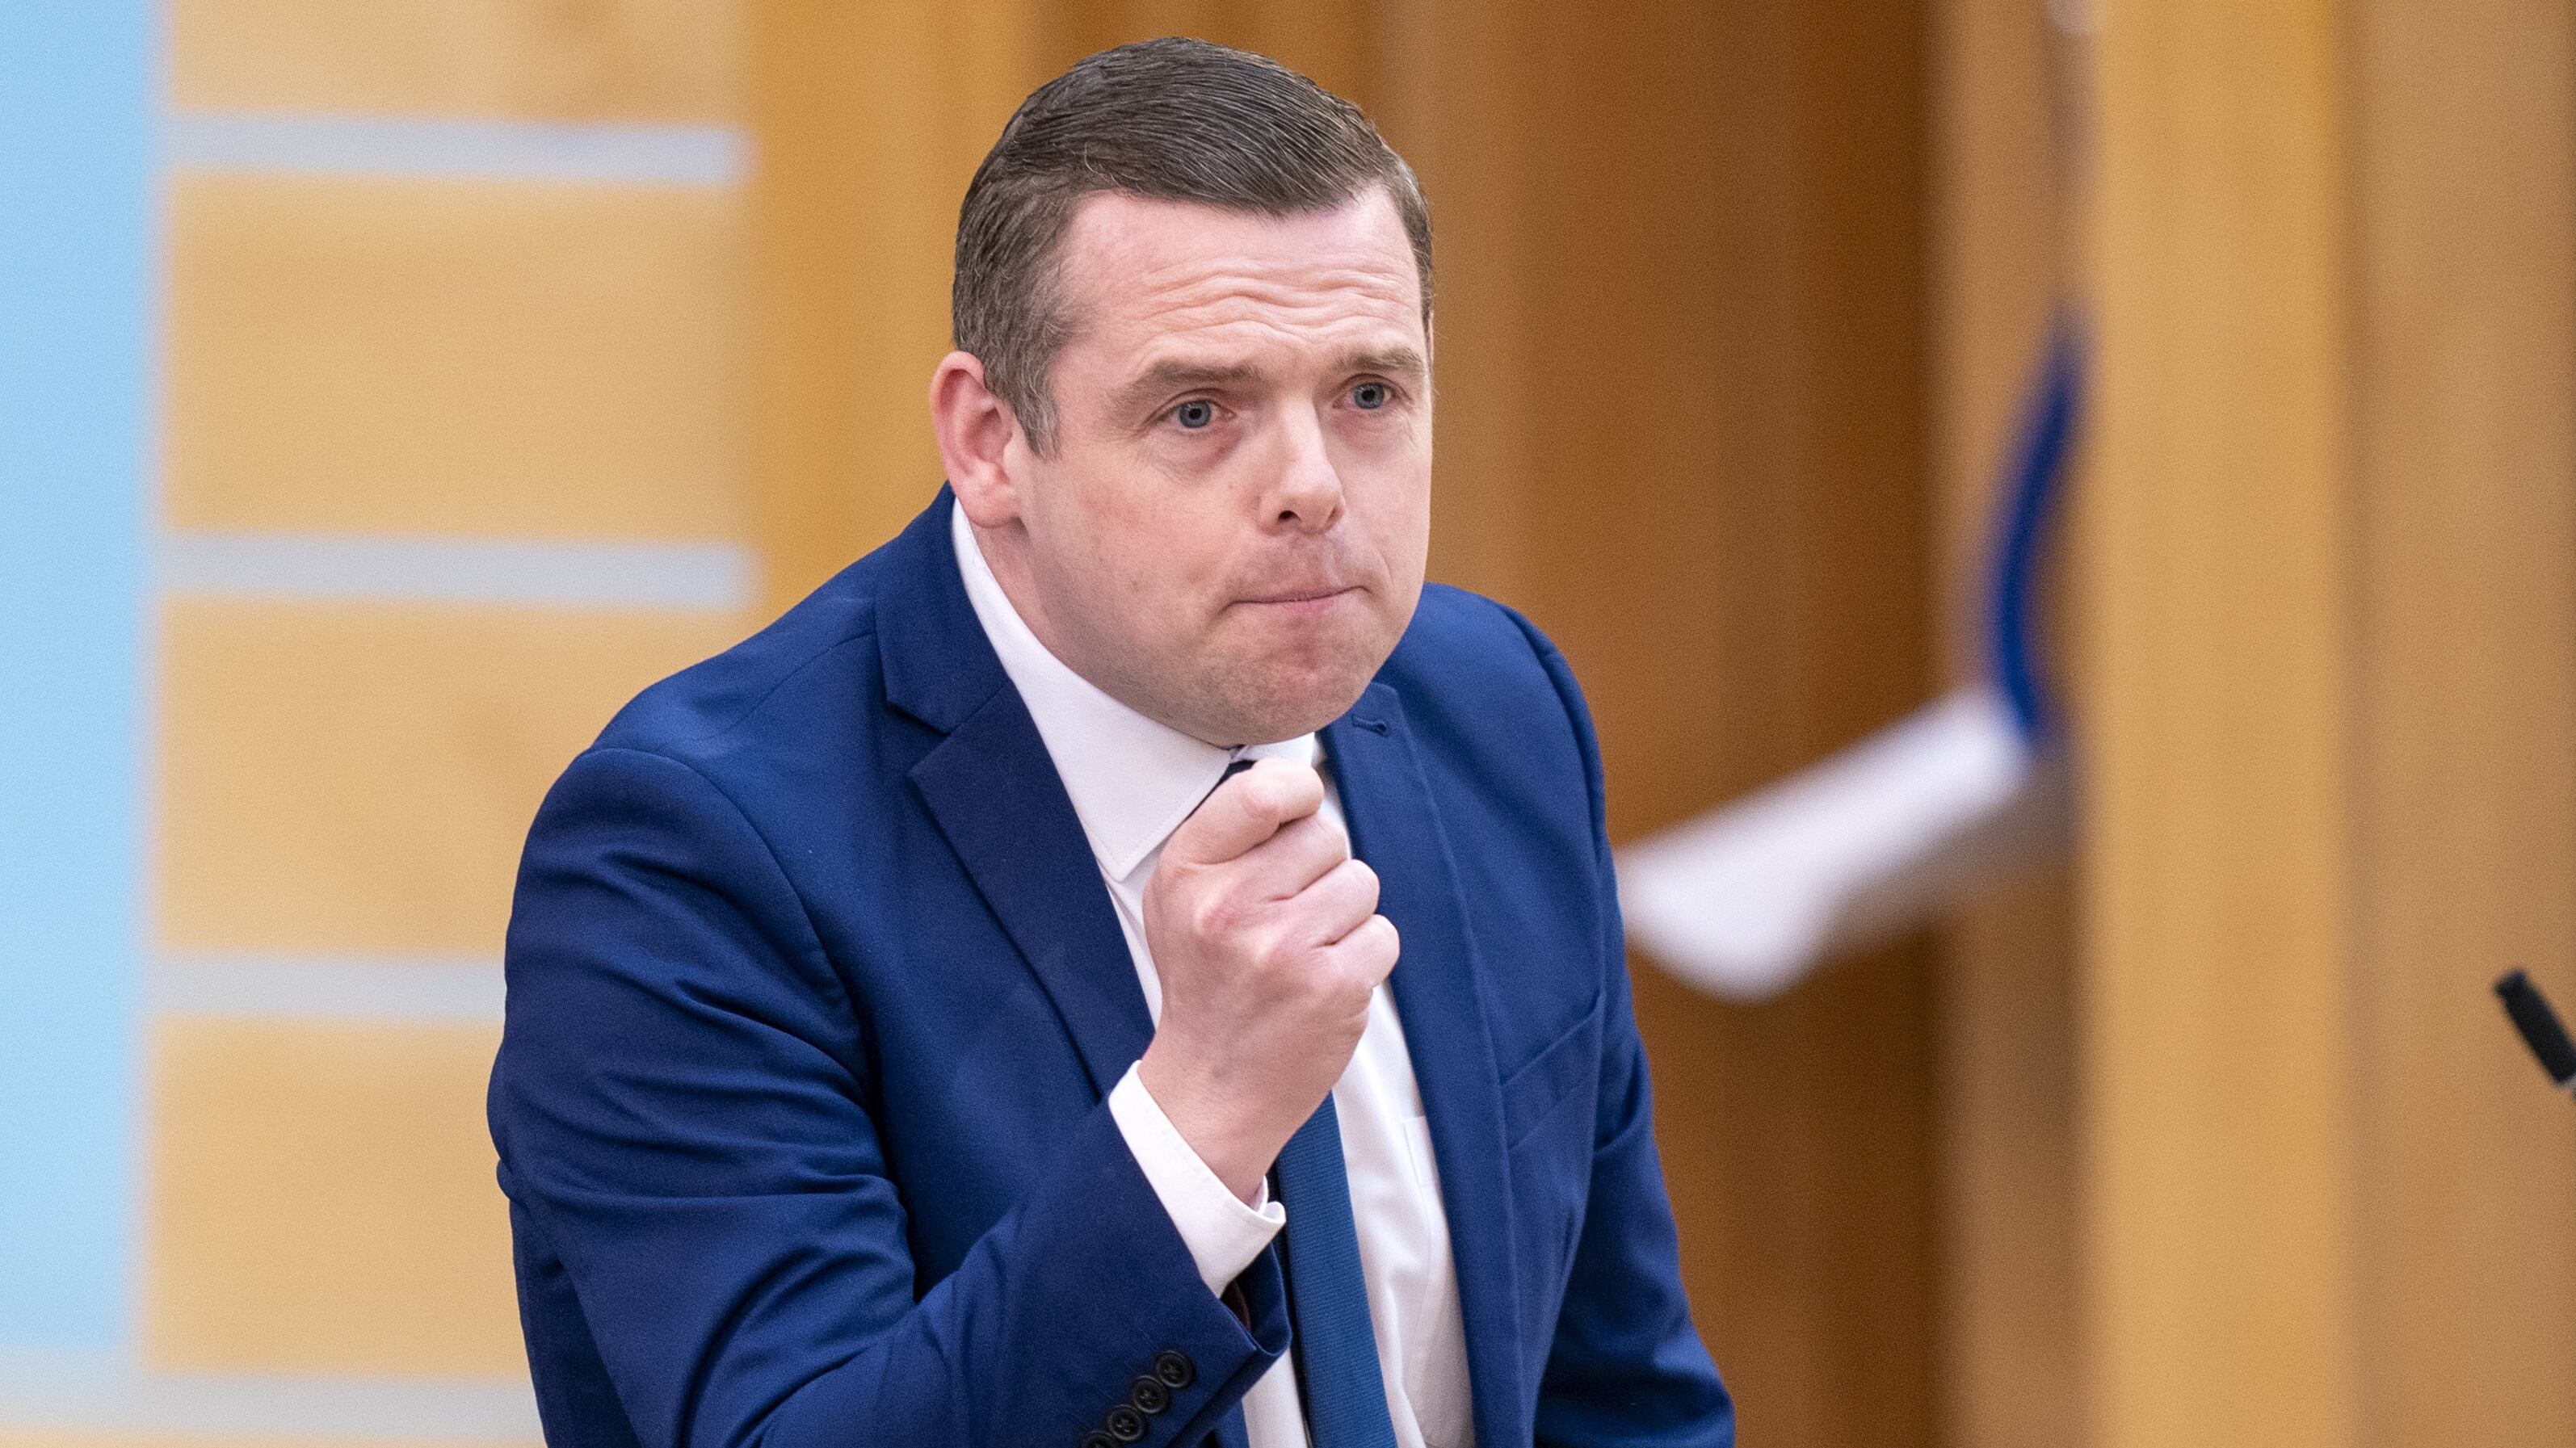 Scottish Conservative leader Douglas Ross has said he has only ever claimed for parliamentary expenses